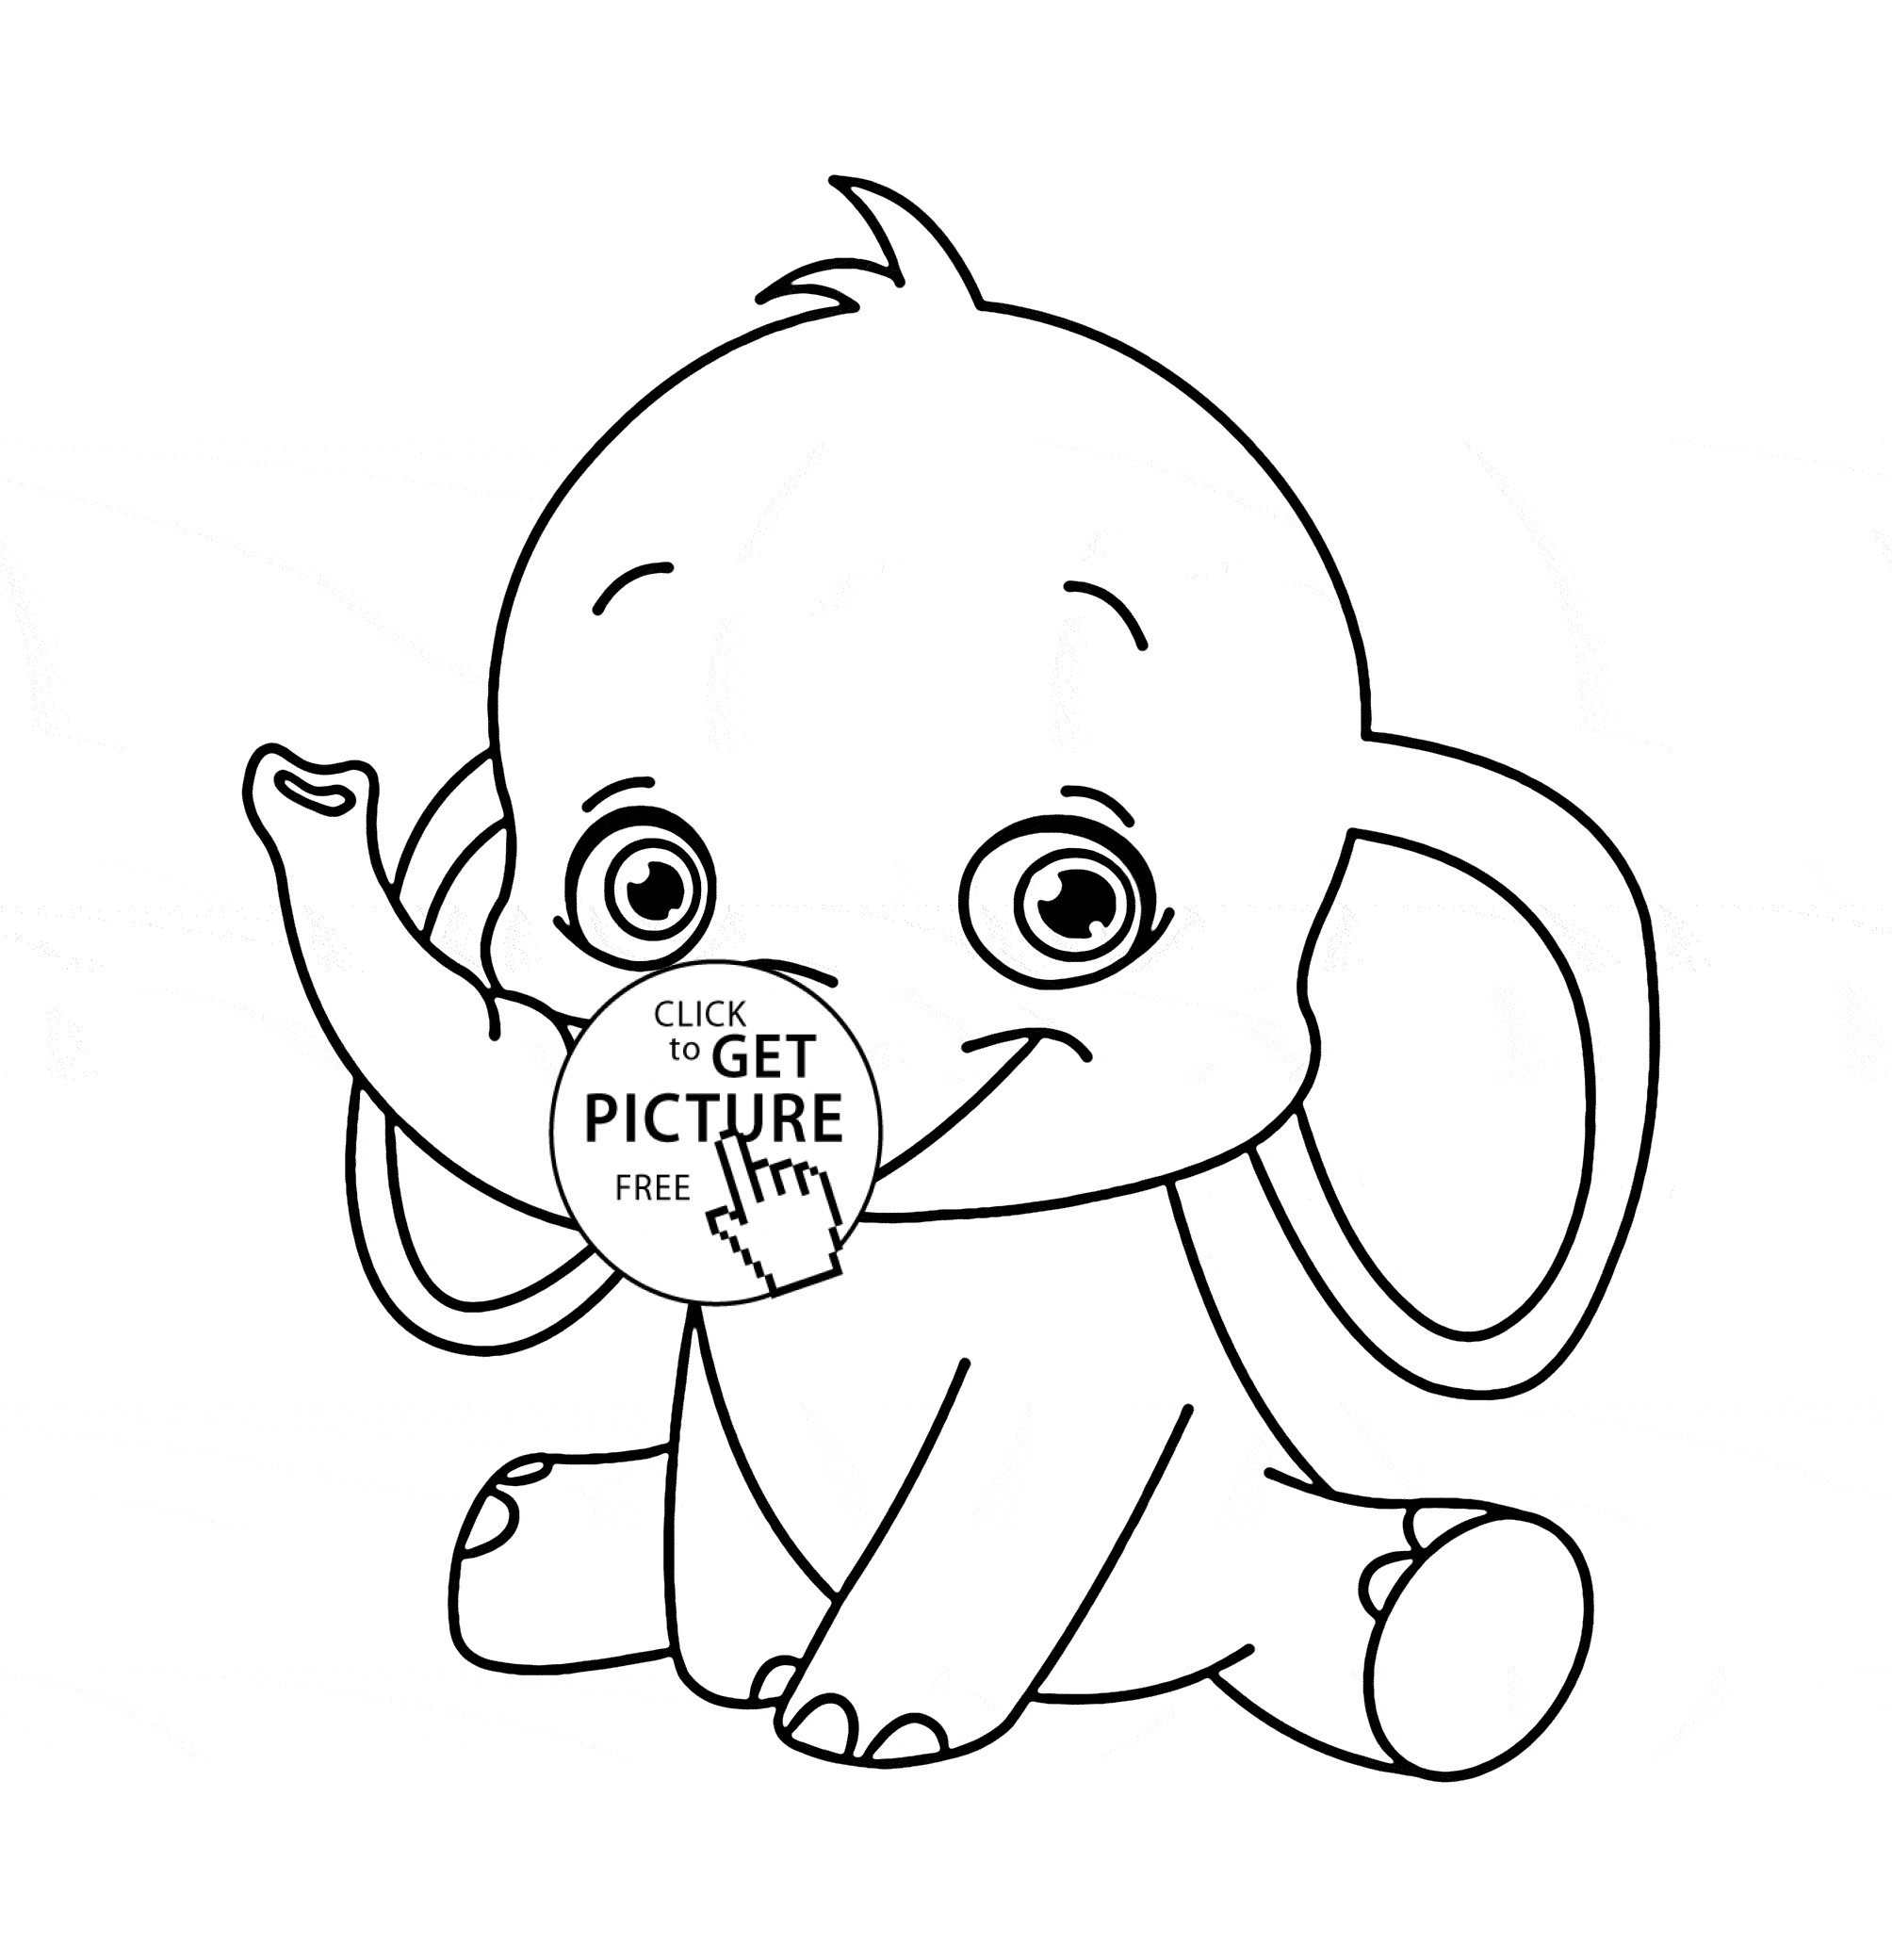 Cute Baby Animal Coloring Pages Printable
 Cute Baby Animal Coloring Pages Printable Food Ideas